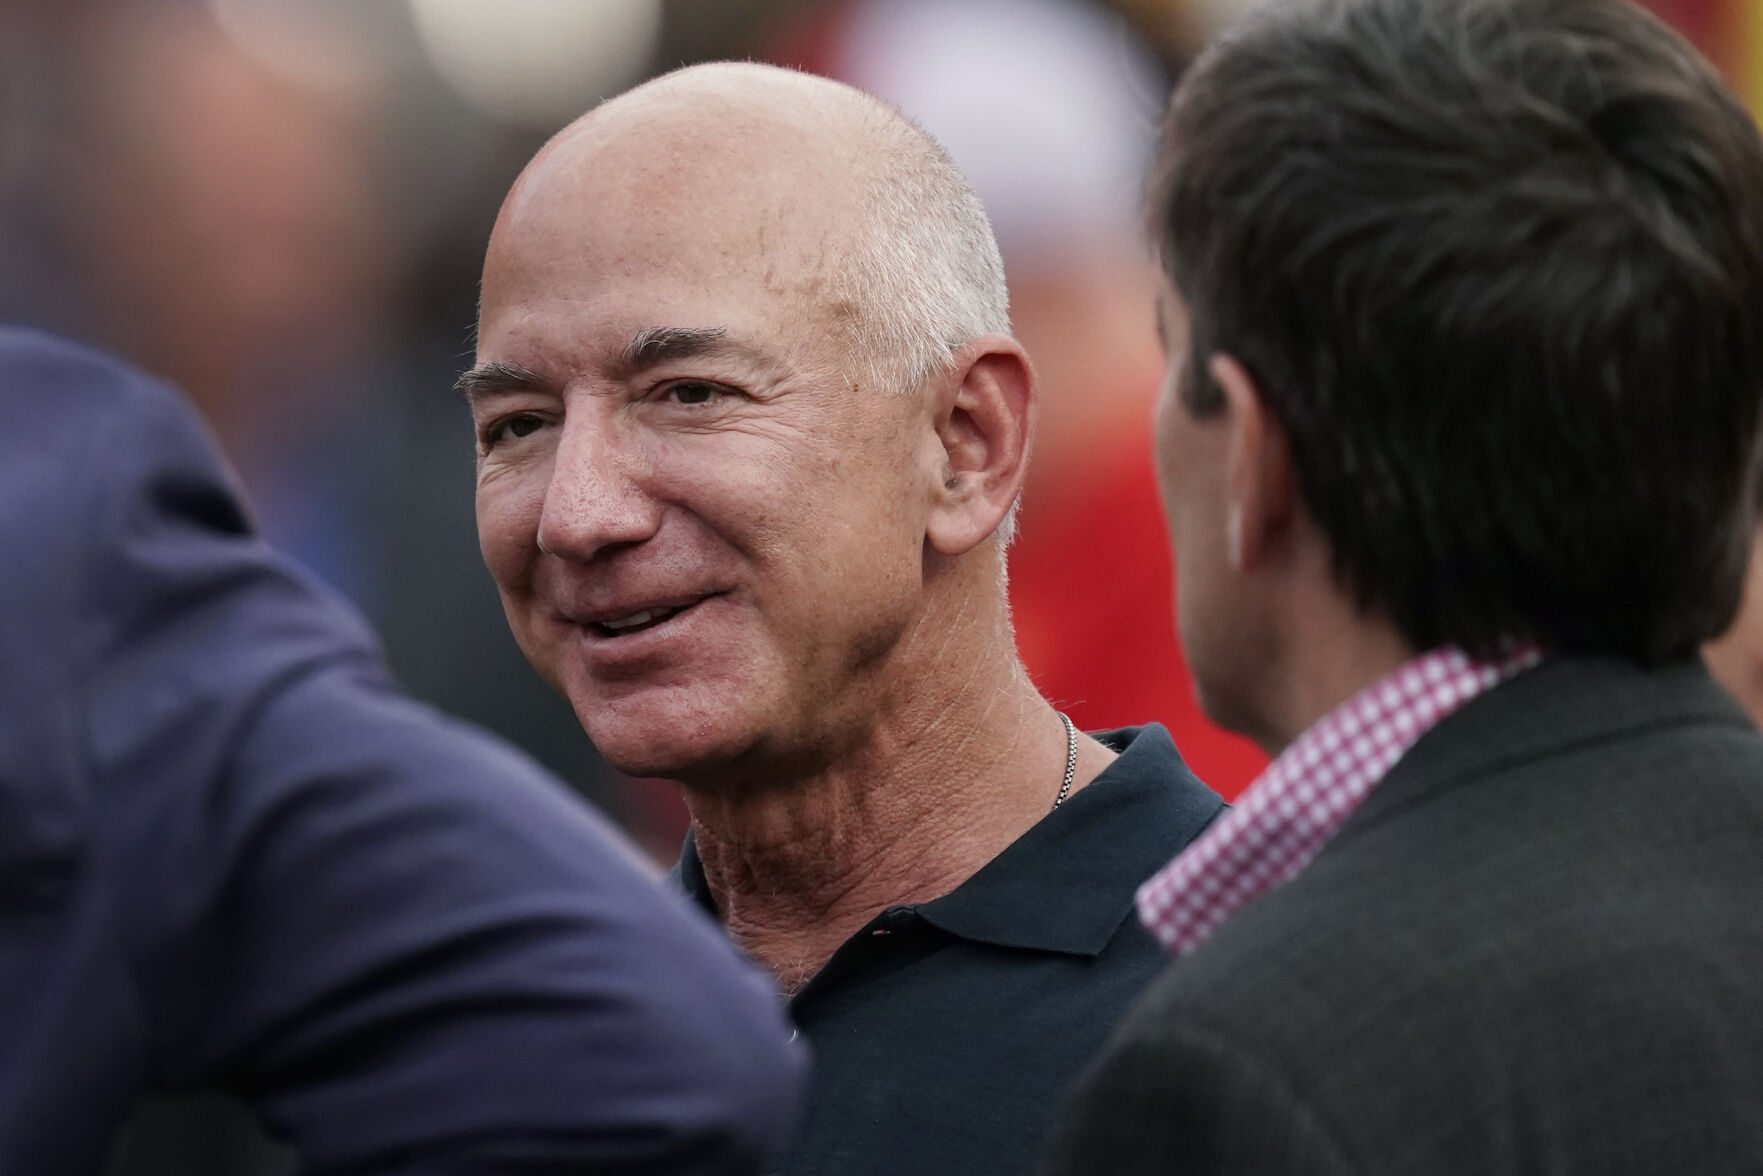 <p>FILE - Amazon founder Jeff Bezos is seen on the sidelines before the start of an NFL football game on Sept. 15, 2022, in Kansas City, Mo. A former housekeeper for Bezos says she and other employees suffered unsafe working conditions that included being forced to climb out a laundry room window to get to a bathroom. In a lawsuit filed in Seattle this week, a longtime housekeeper claims she was discriminated and retaliated against when she complained about a lack of rest breaks or an area where staff could eat. (AP Photo/Charlie Riedel, File)</p>   PHOTO CREDIT: Charlie Riedel 